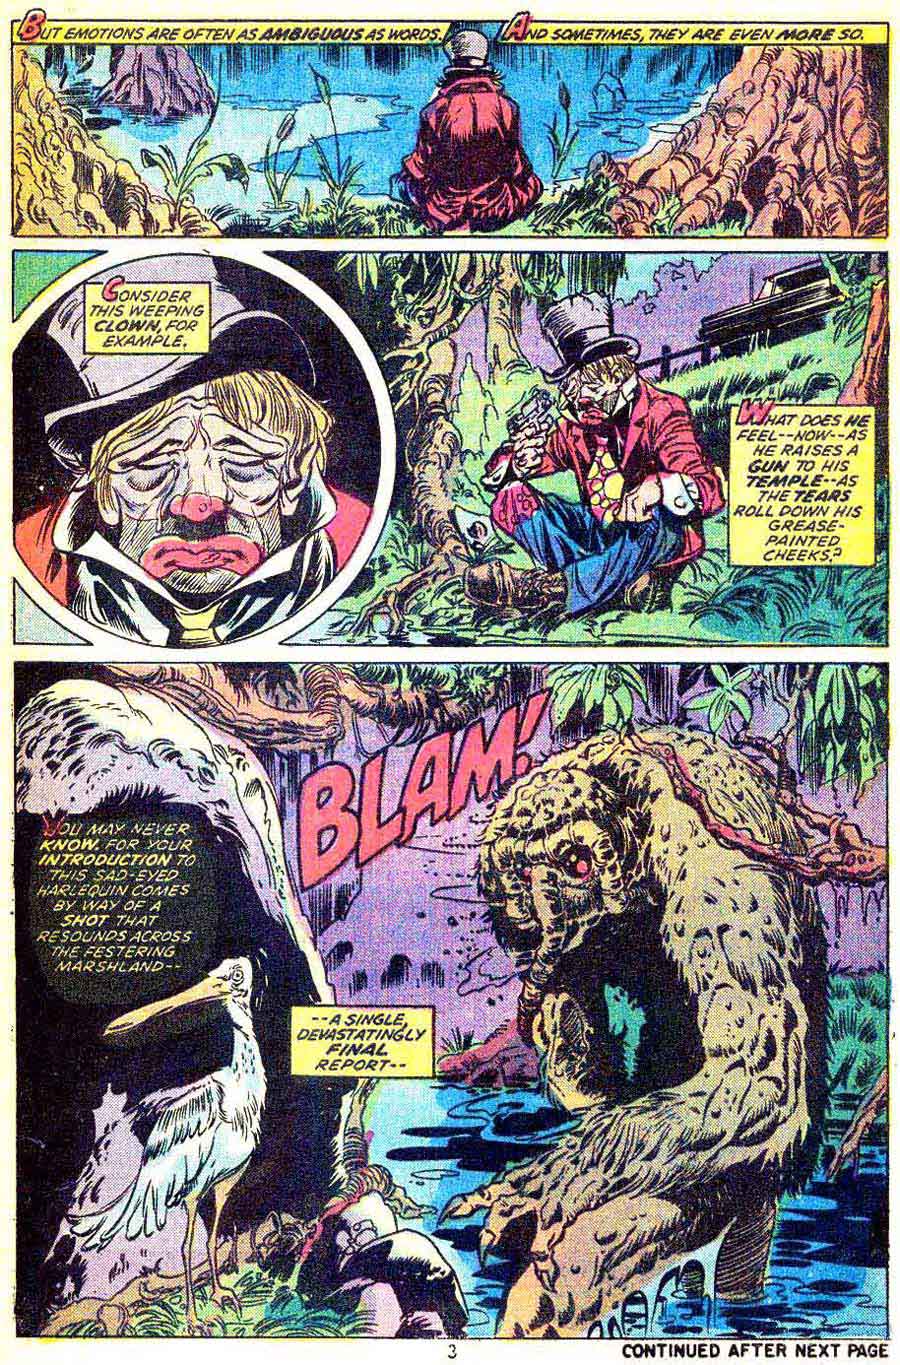 Man-Thing v1 #5 marvel 1970s bronze age comic book page art by Mike Ploog